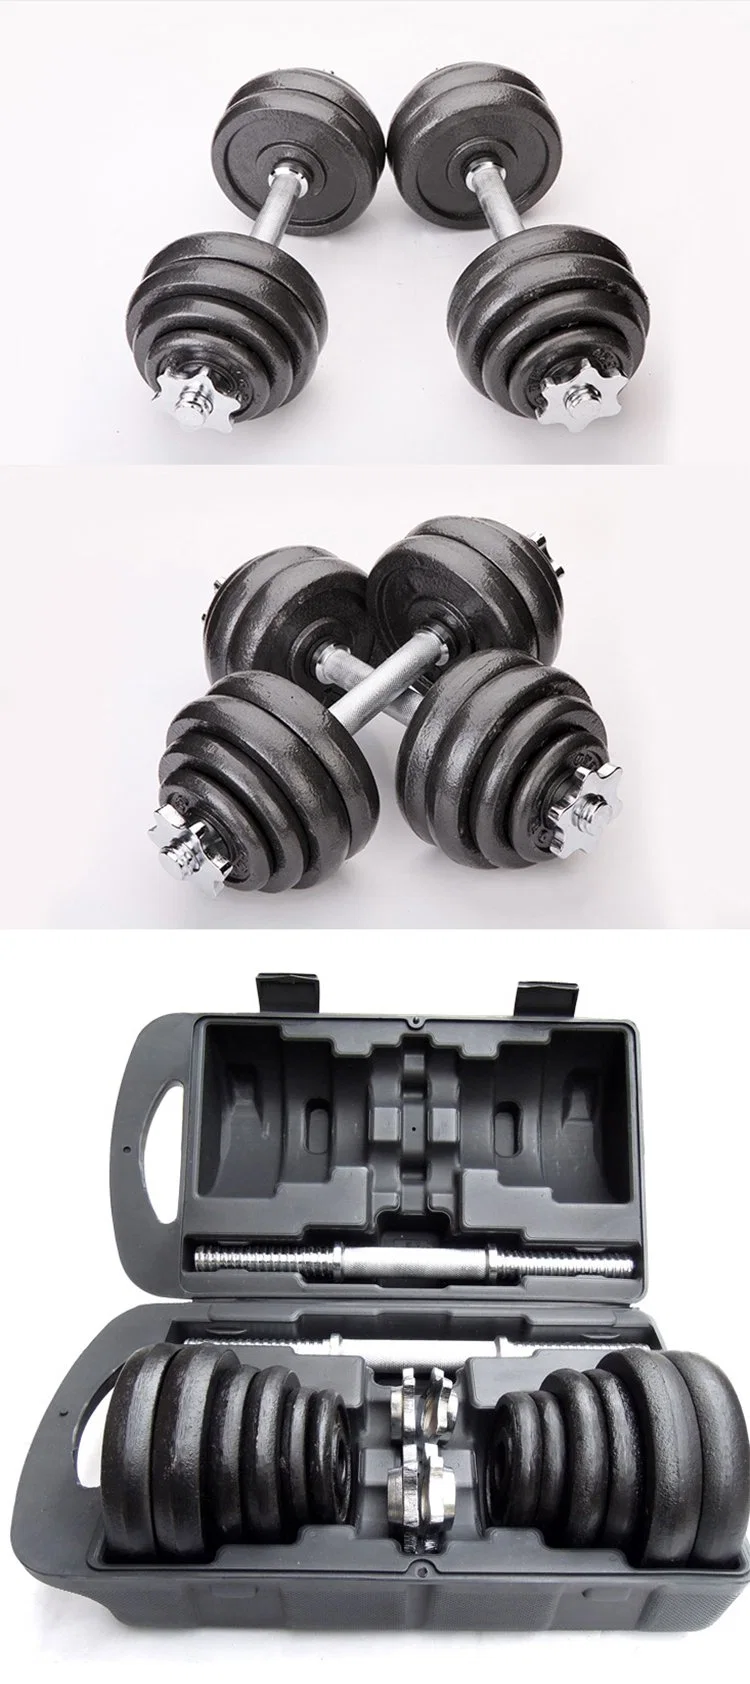 People Buy Sports Equipment Power Training Gym Equipment Fitness Cast Iron Dumbbell Sets